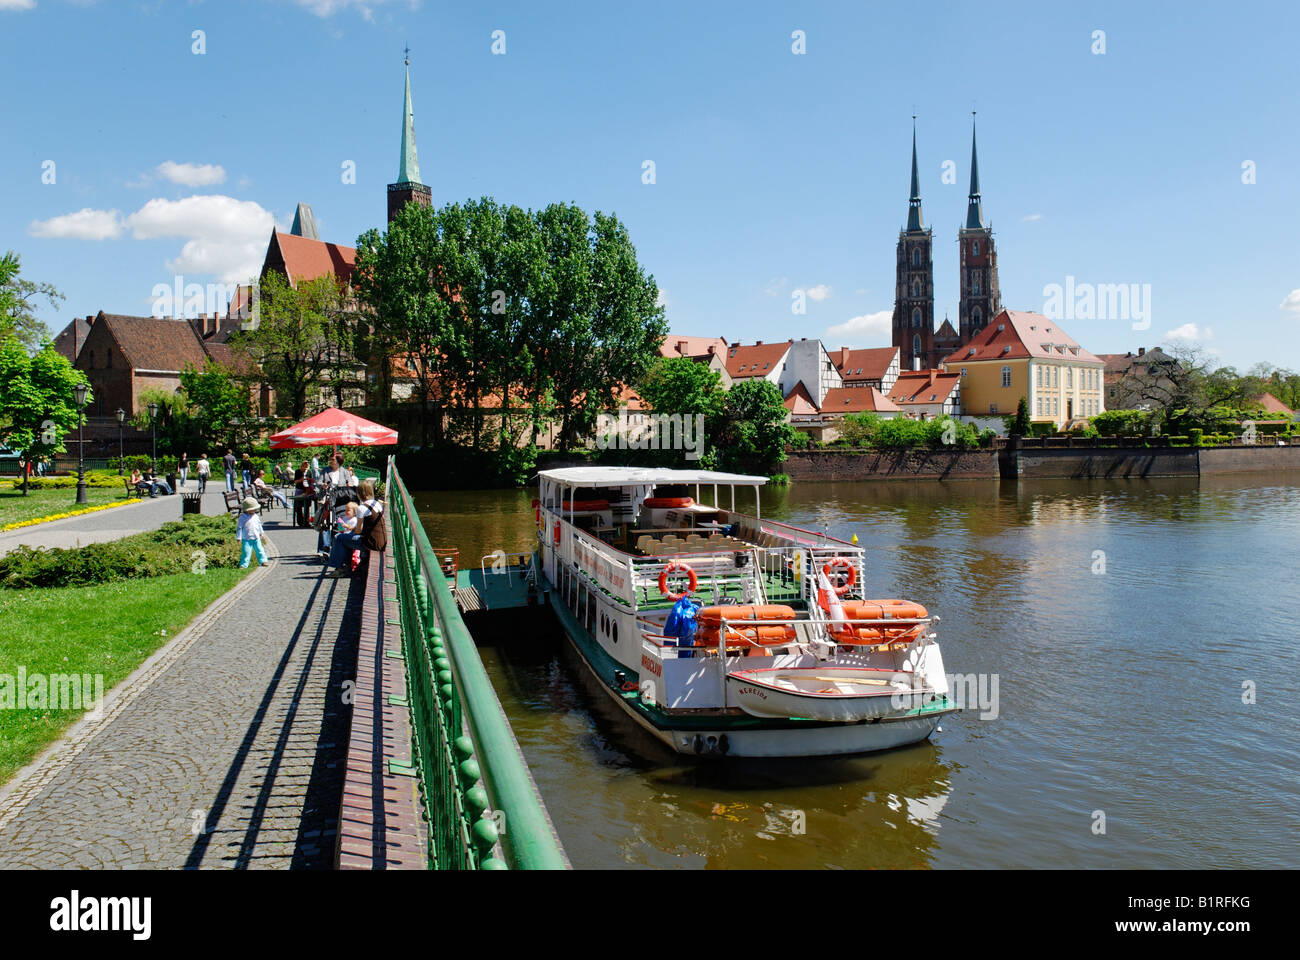 Excursion boat on the River Oder, Wroclaw, Silesia, Poland, Europe Stock Photo